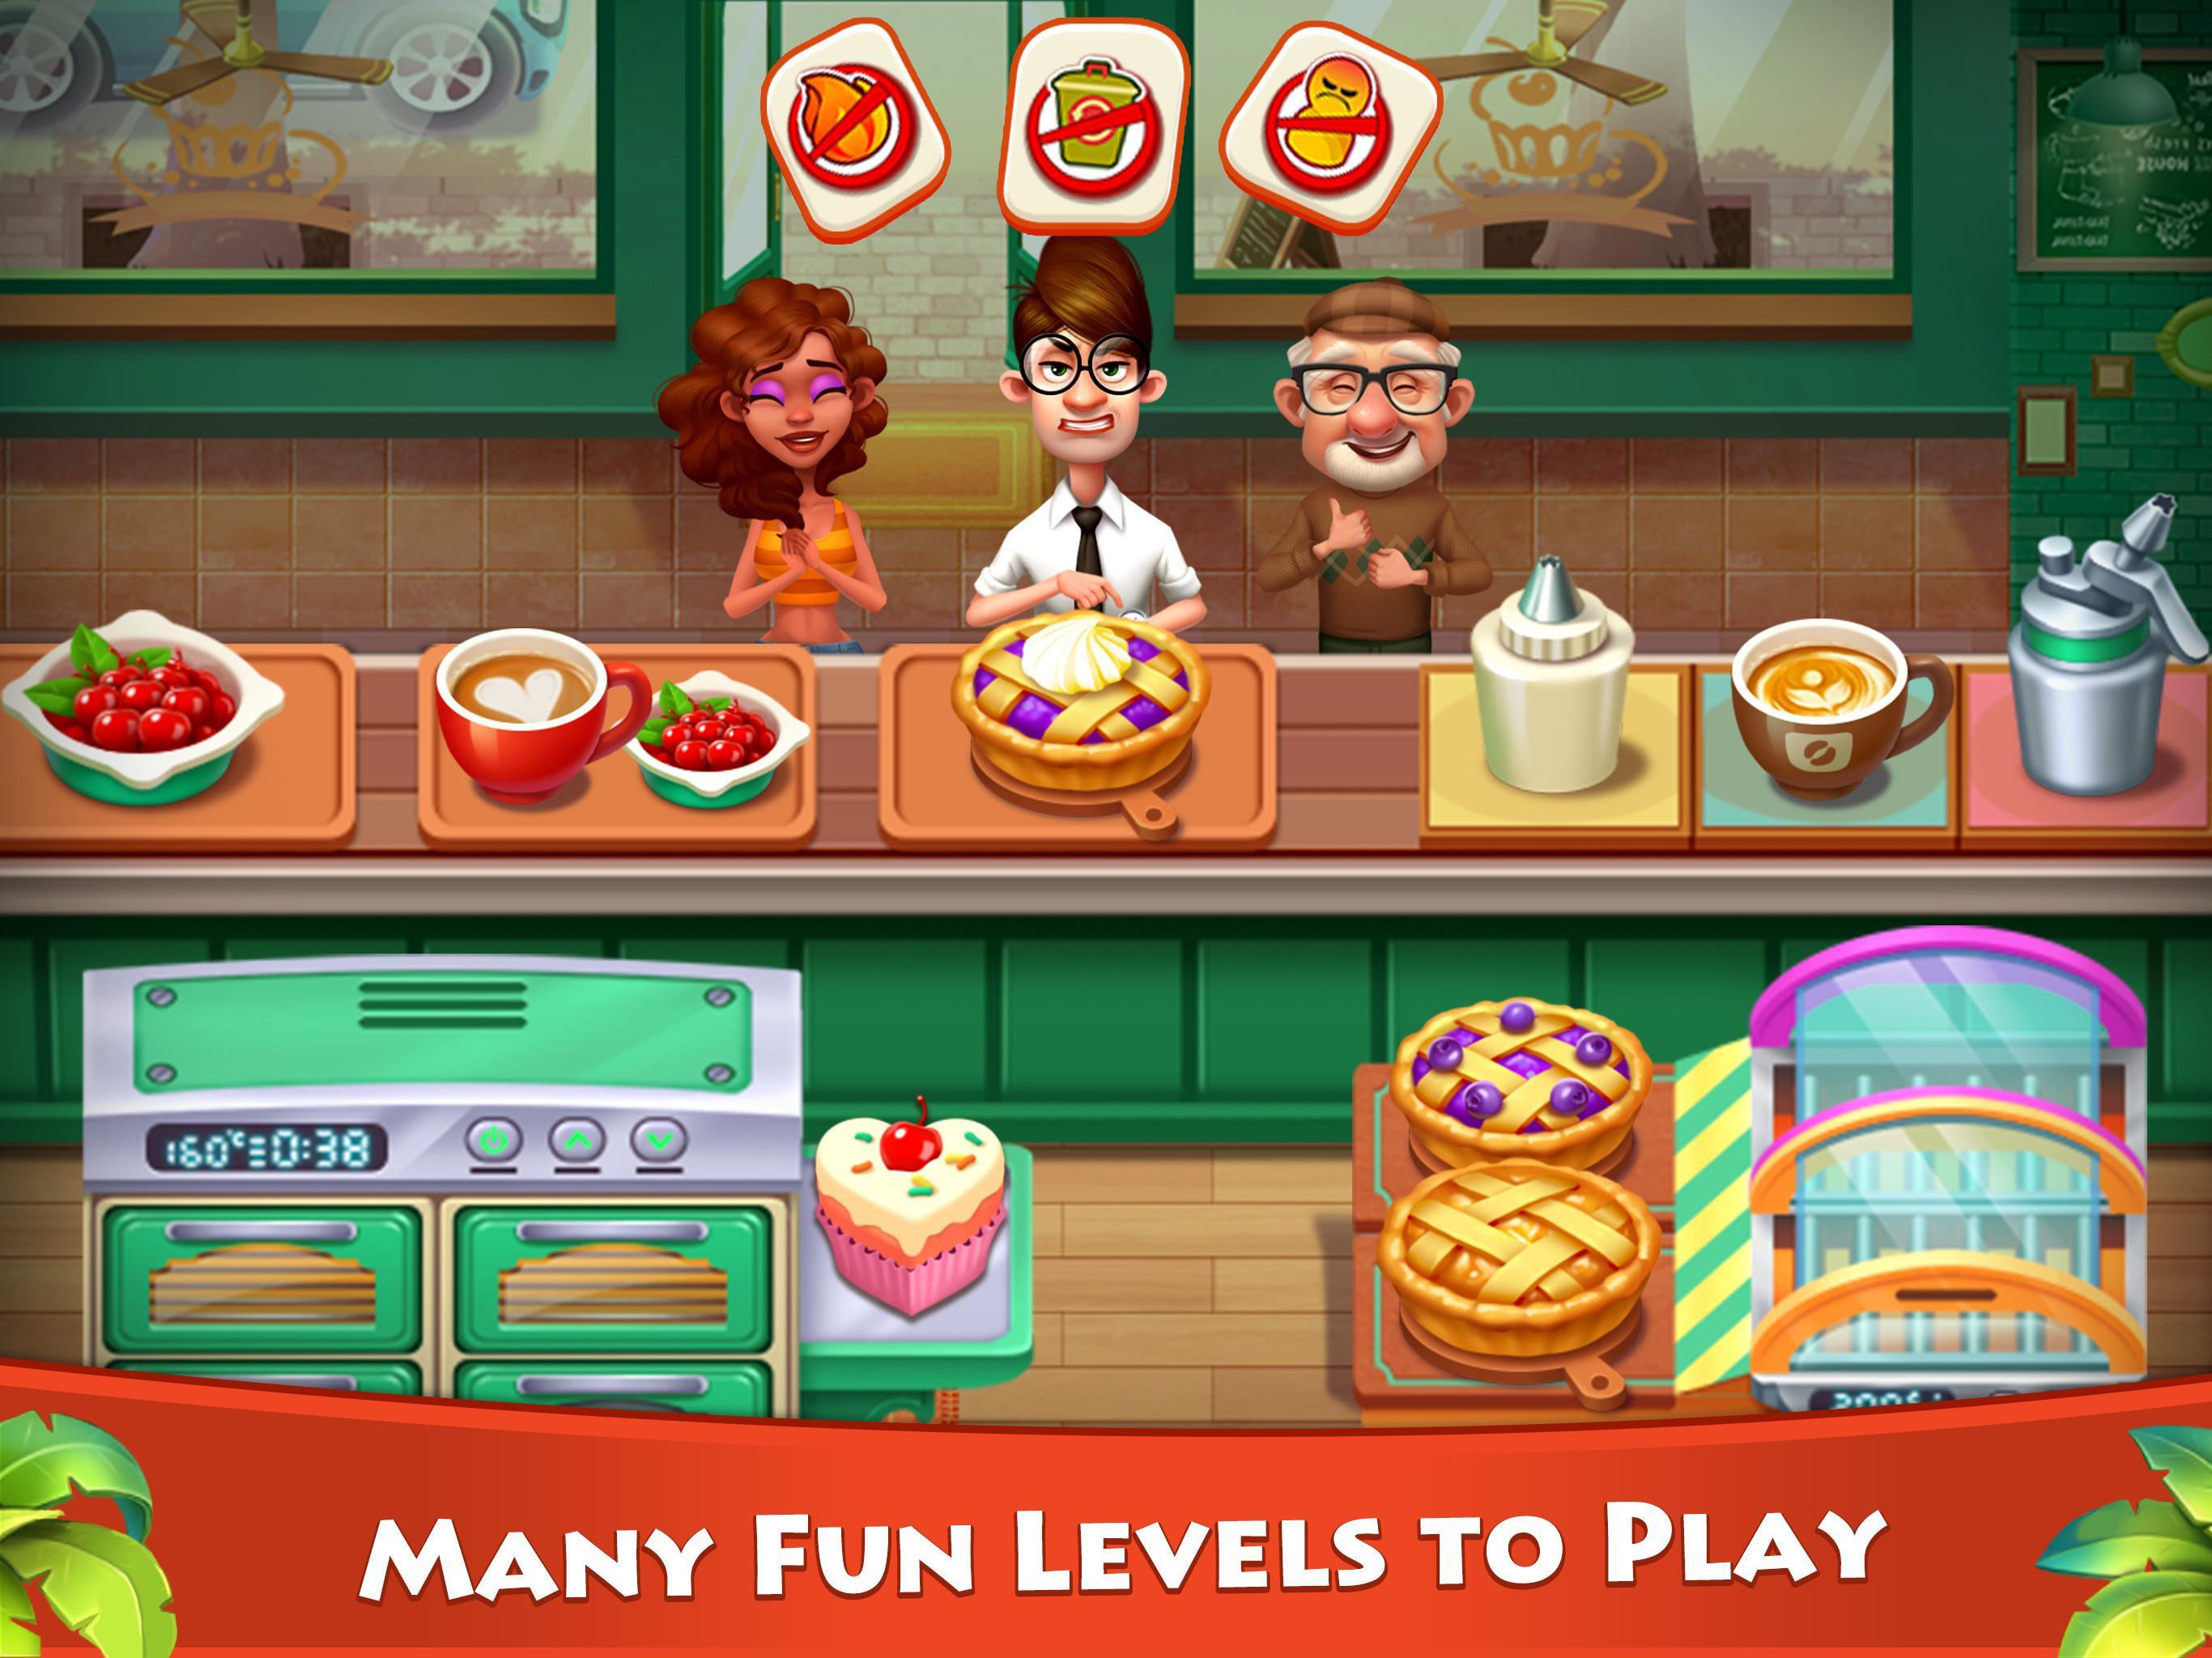 Cooking Town – Restaurant Chef Gameのキャプチャ